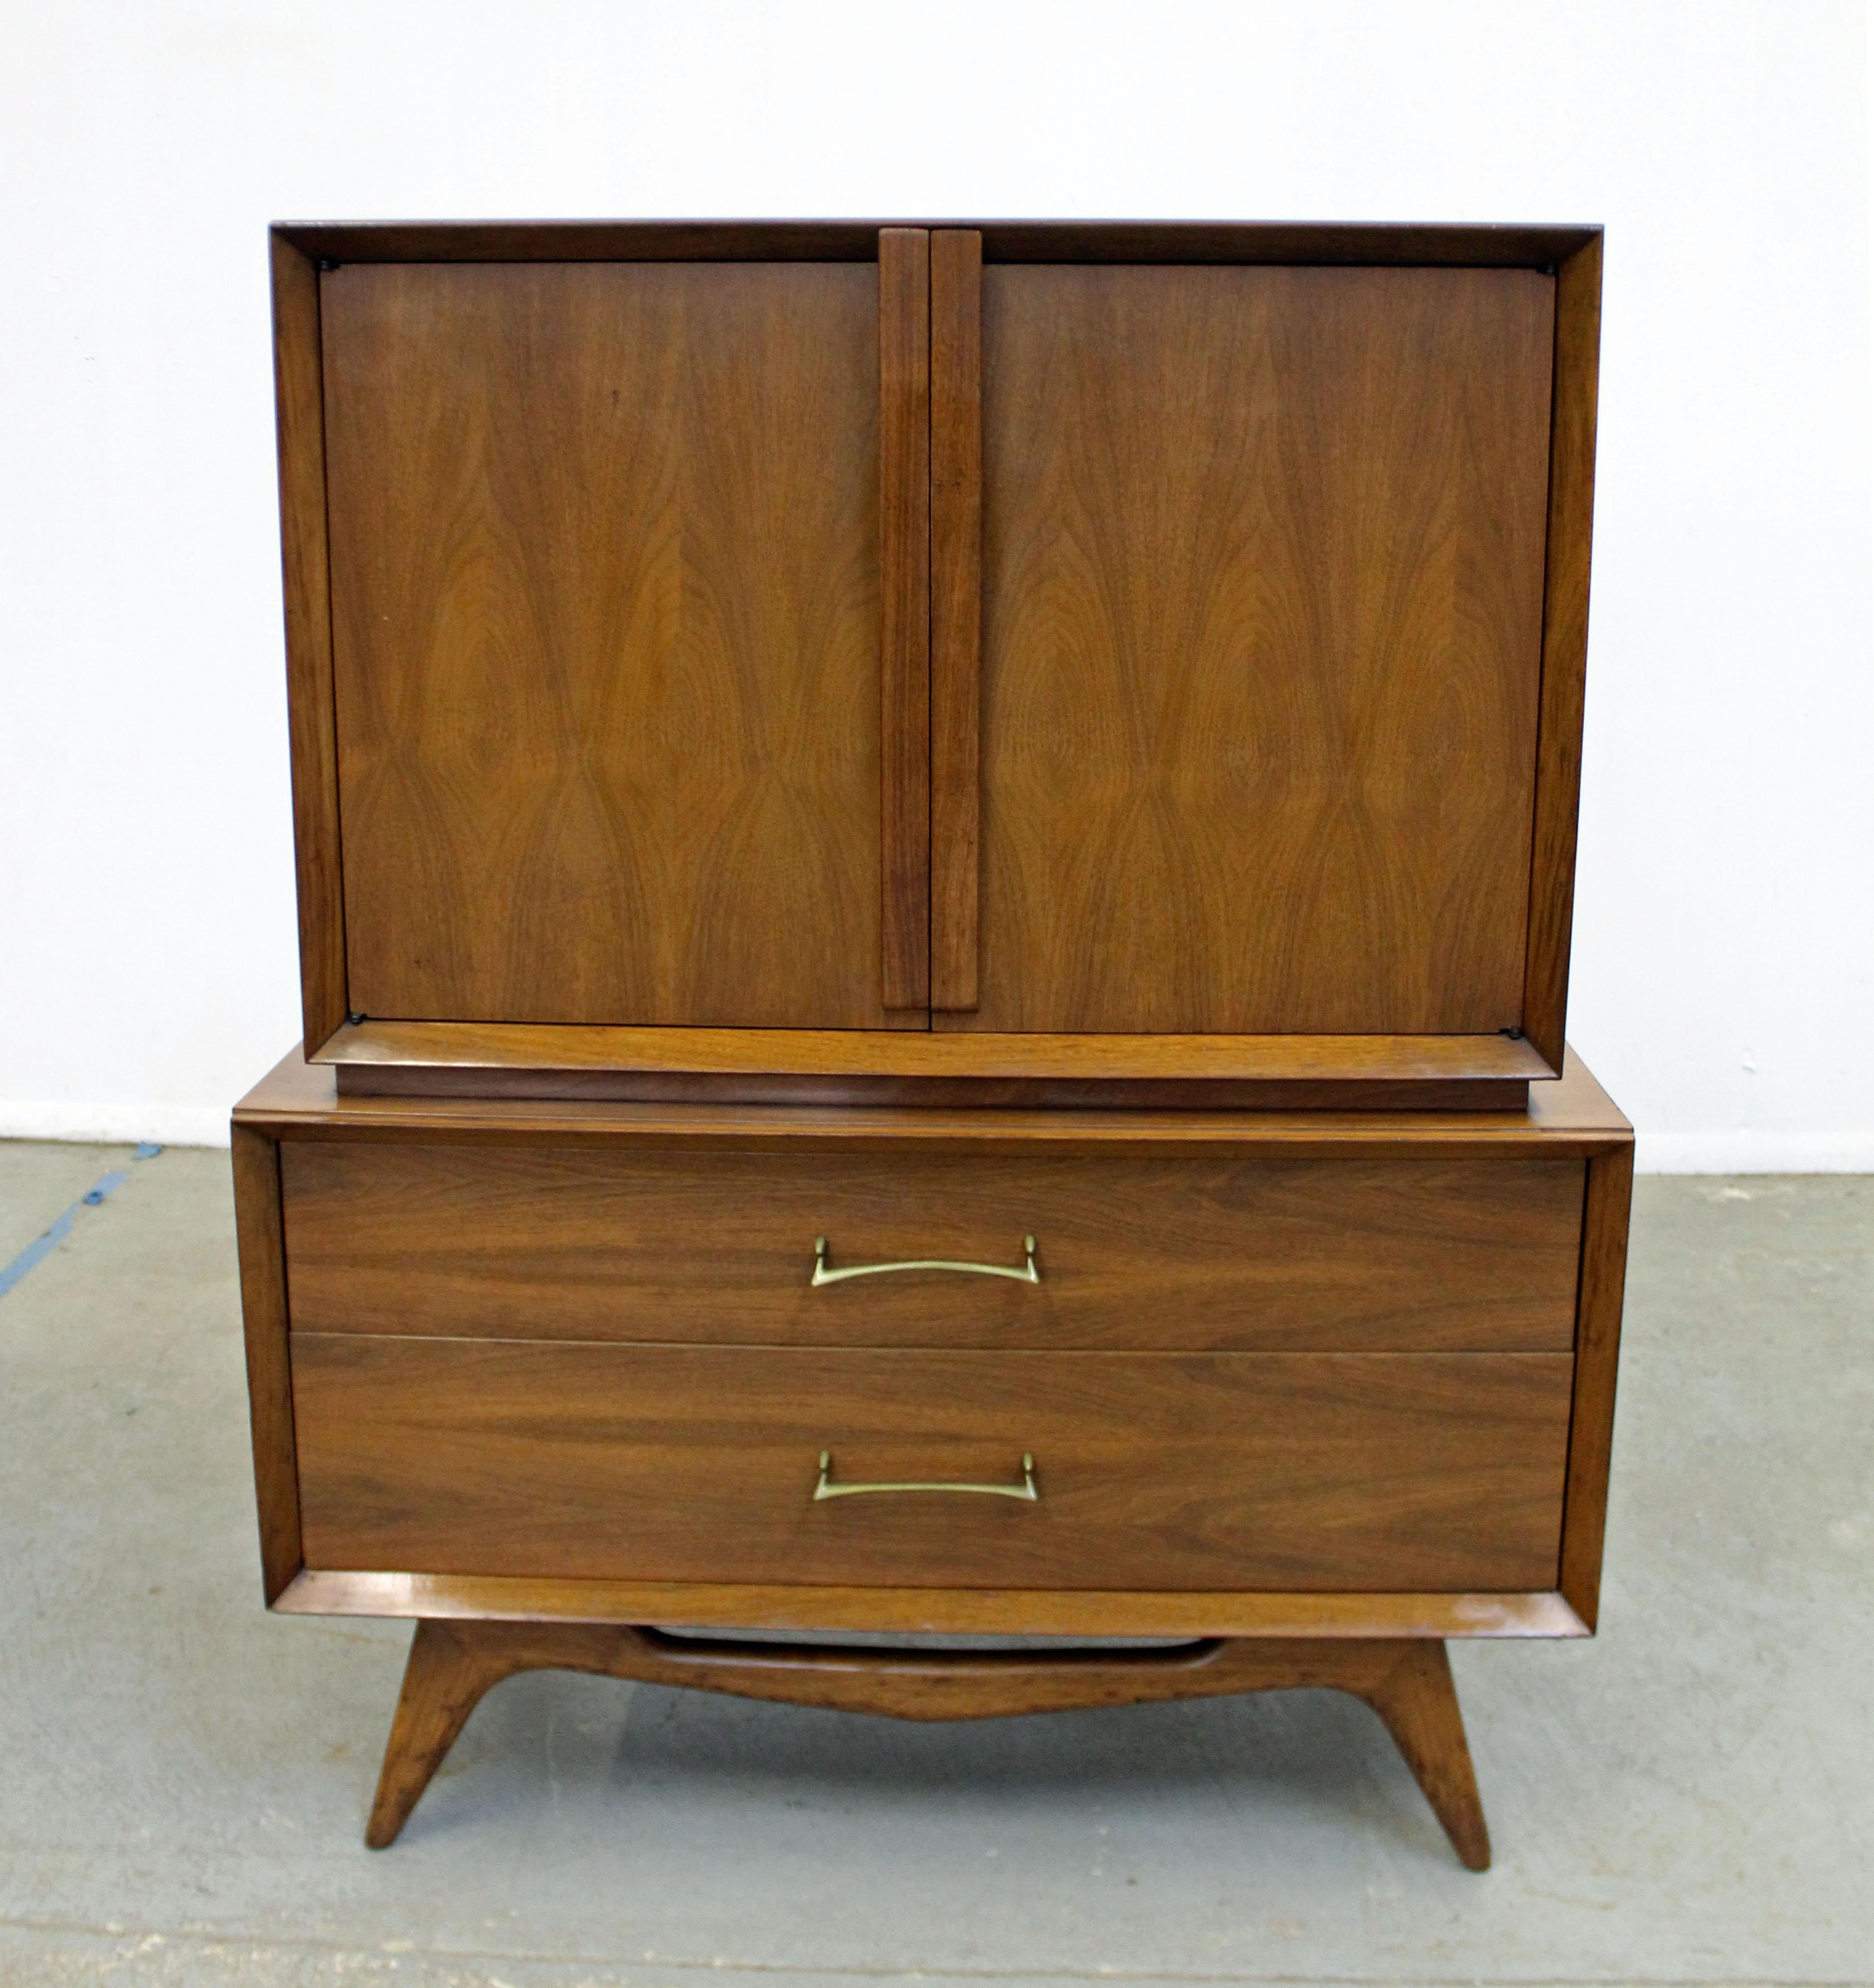 Offered is a beautiful Mid-Century Modern tall chest with ample storage space, fearturing two large bottom drawers and three top drawers behind doors with sculpted pulls. This piece is made of walnut. It is in good vintage condition with some